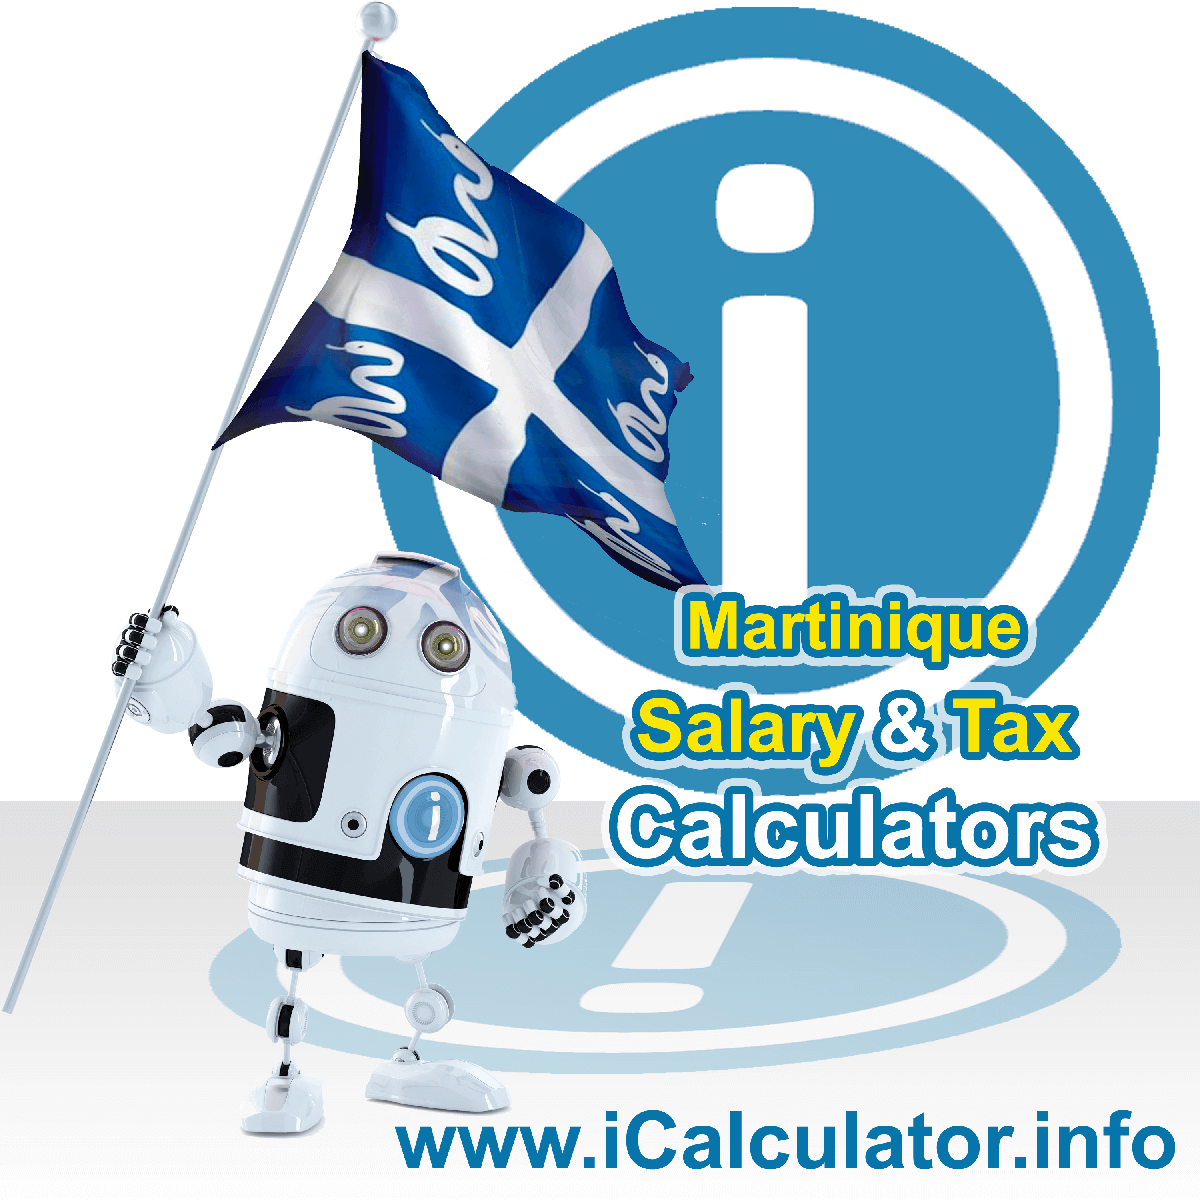 Martinique Salary Calculator. This image shows the Martiniqueese flag and information relating to the tax formula for the Martinique Tax Calculator